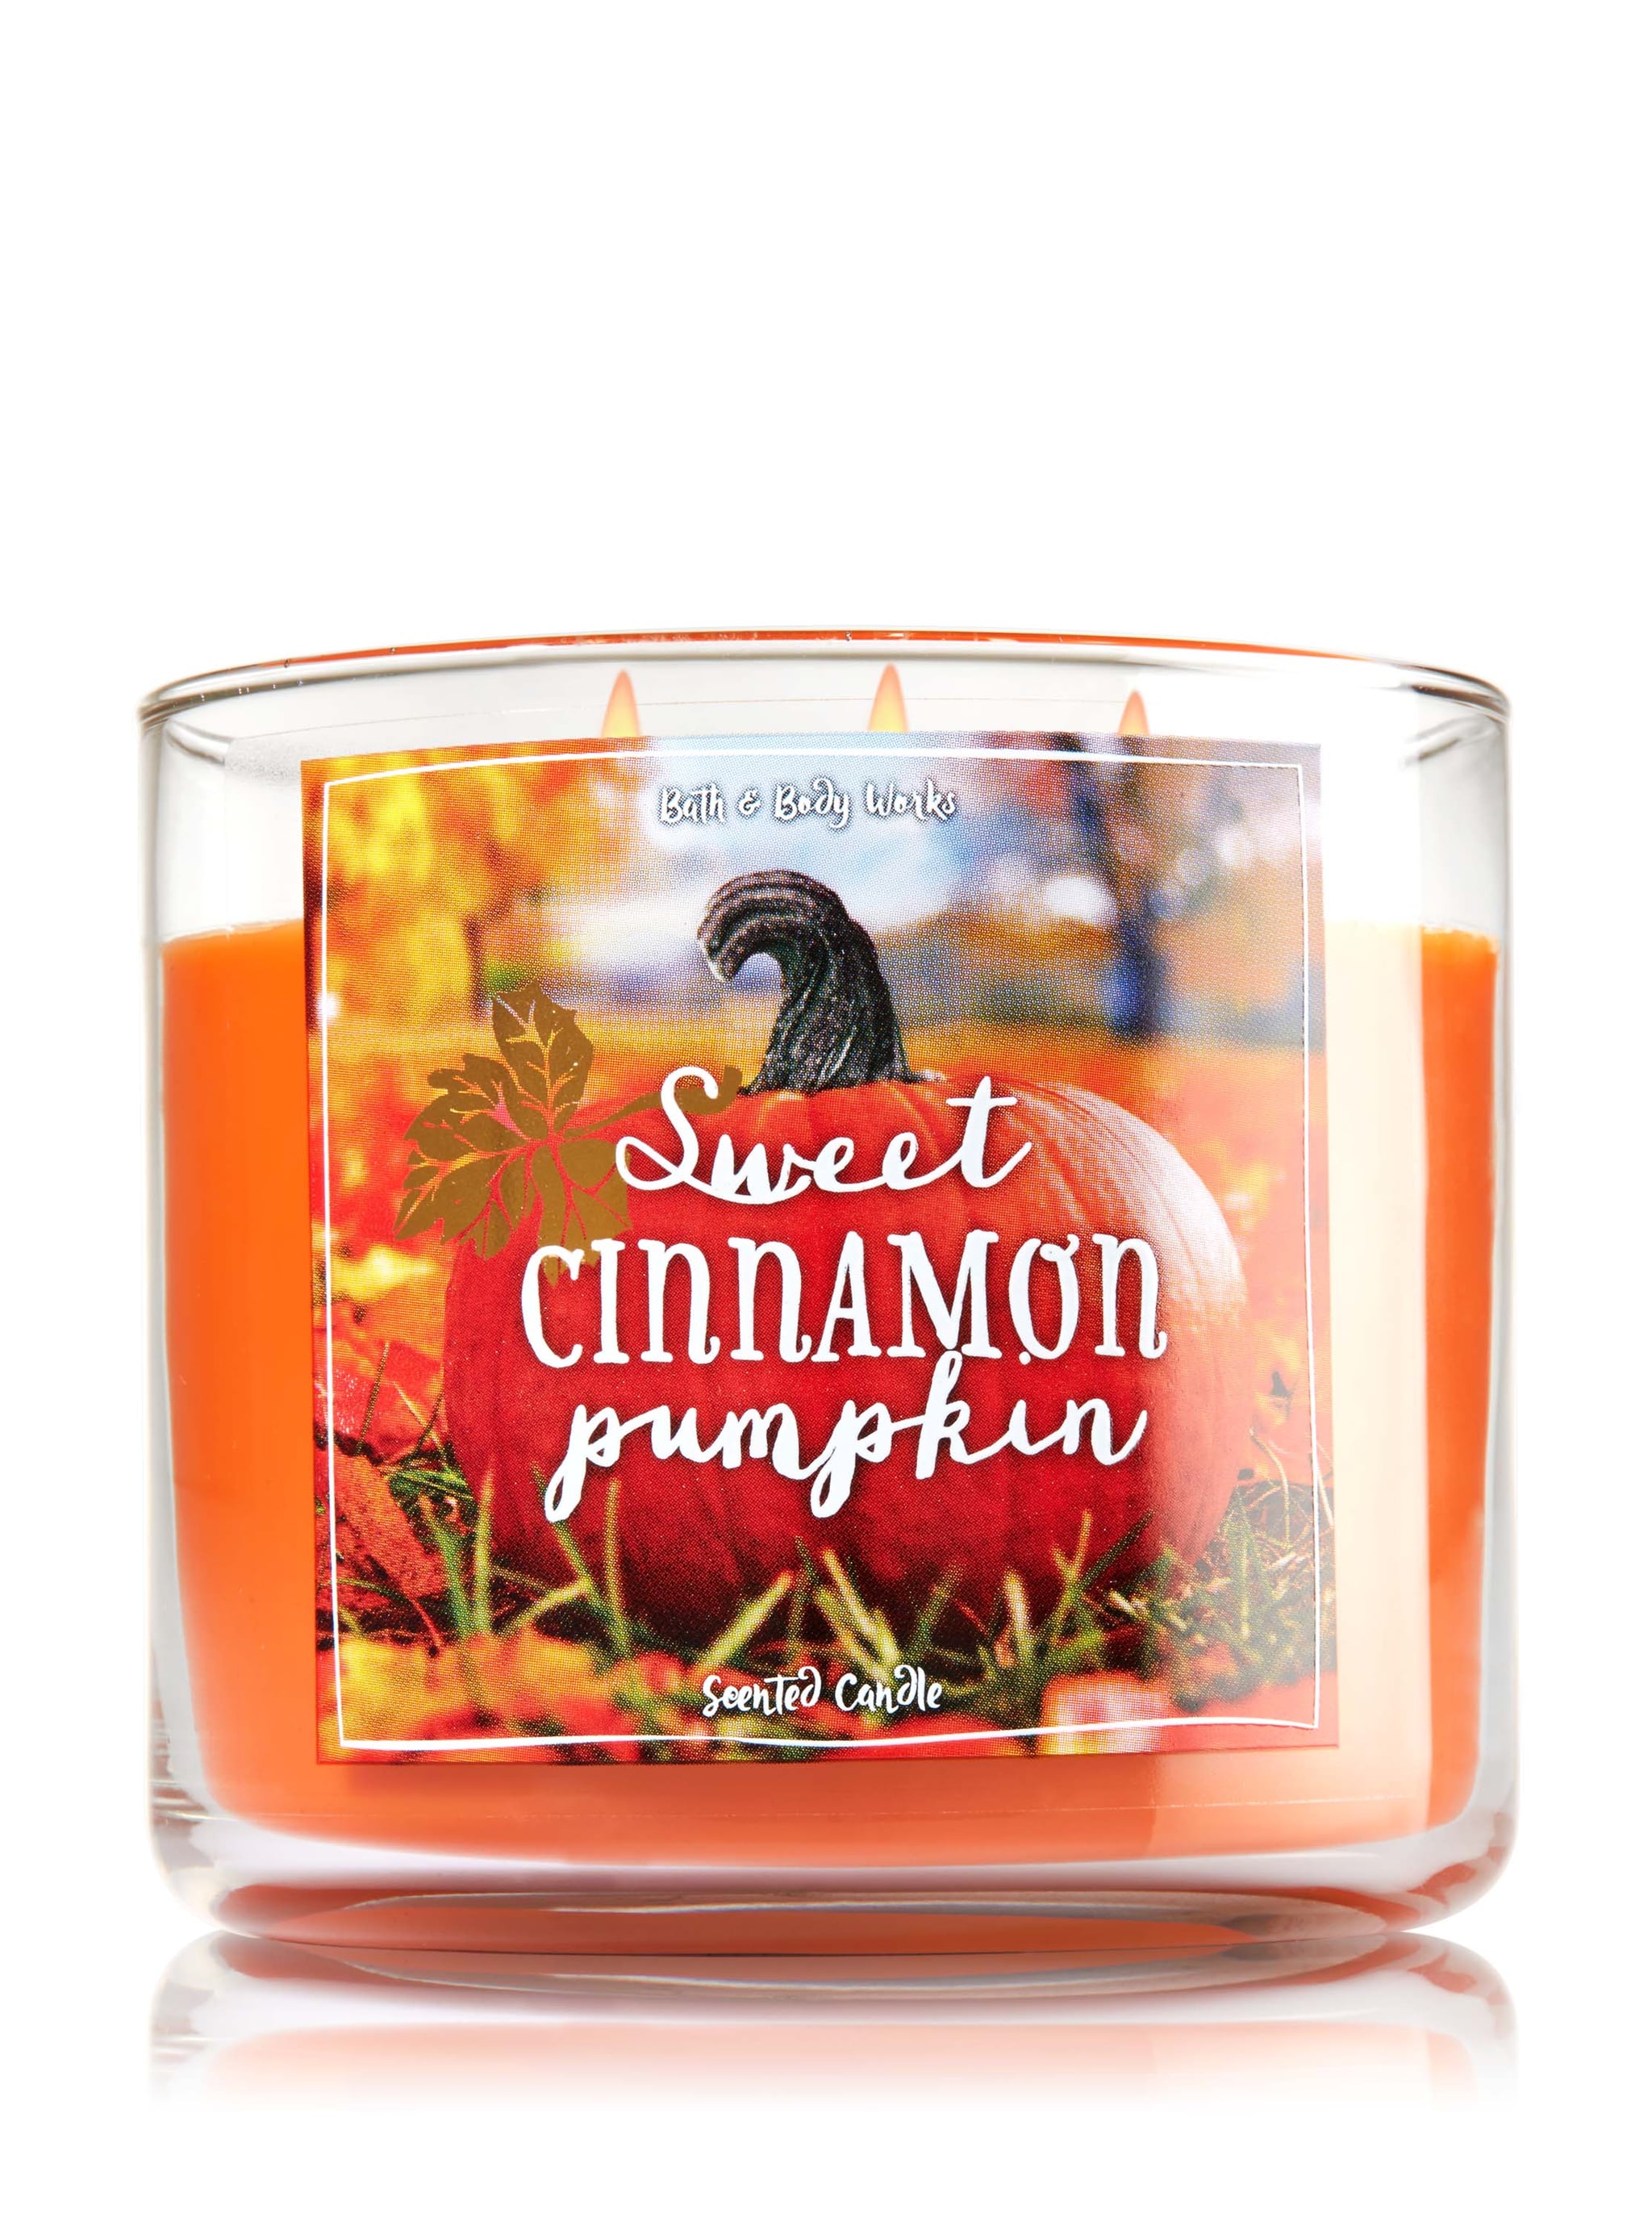 Bath & Body Works Scented 3-Wick Candle in Sweet Cinnamon Pumpkin Bath and body works 